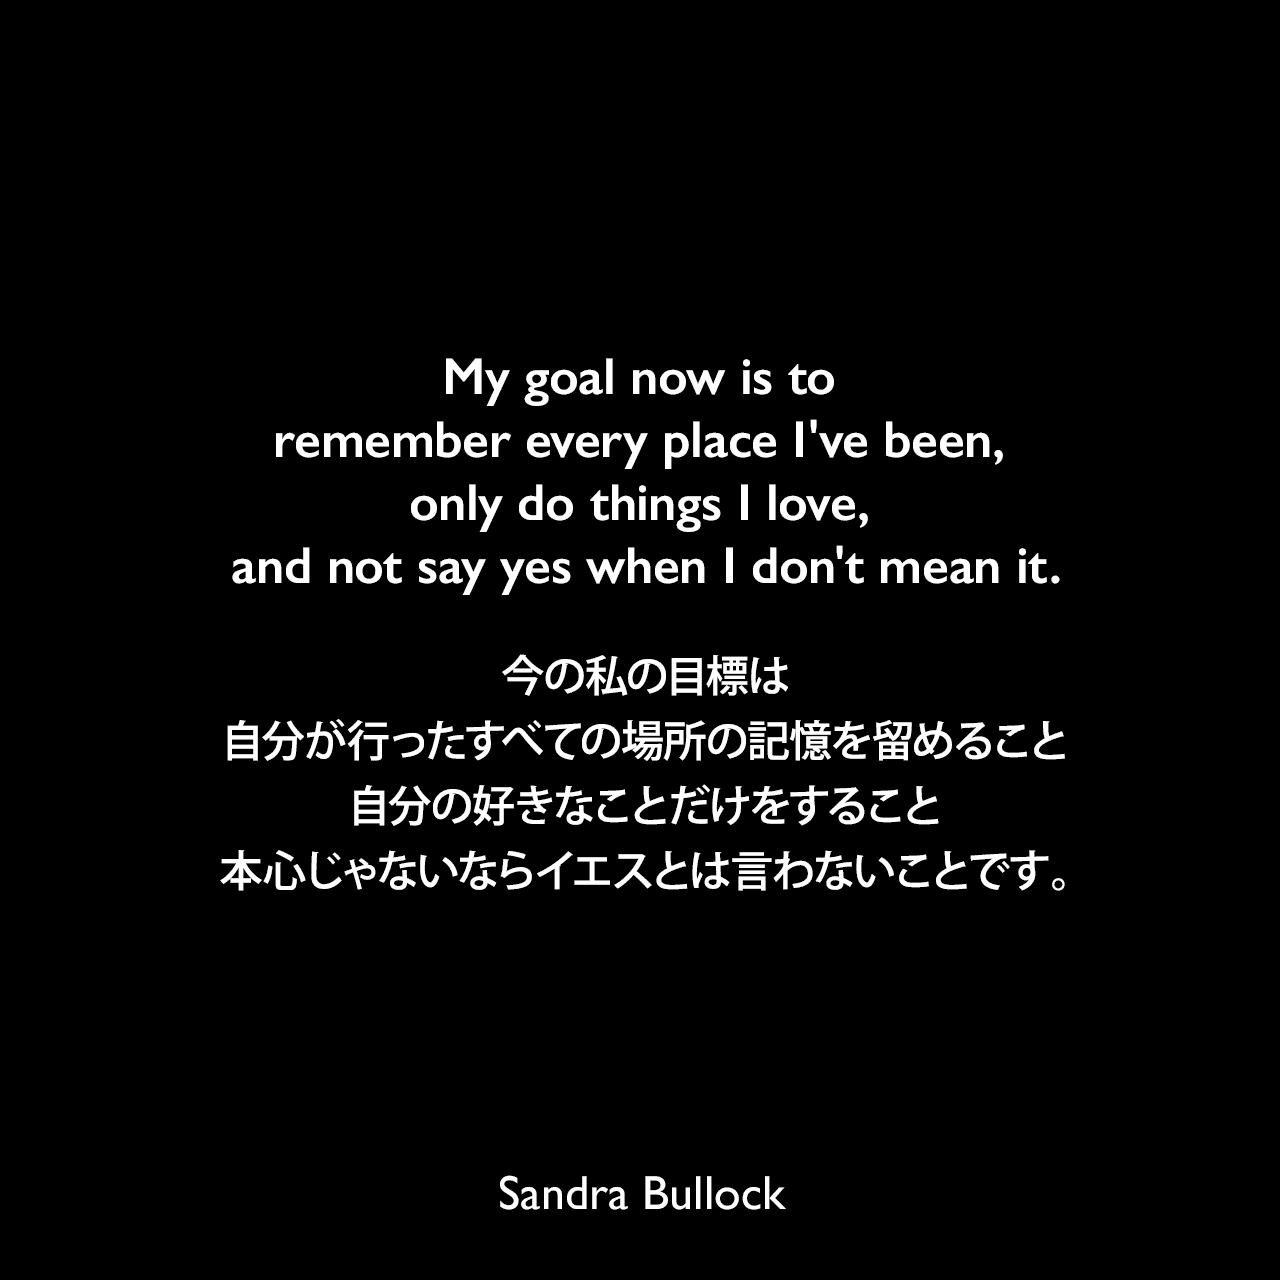 My goal now is to remember every place I've been, only do things I love, and not say yes when I don't mean it.今の私の目標は、自分が行ったすべての場所の記憶を留めること、自分の好きなことだけをすること、本心じゃないならイエスとは言わないことです。Sandra Bullock